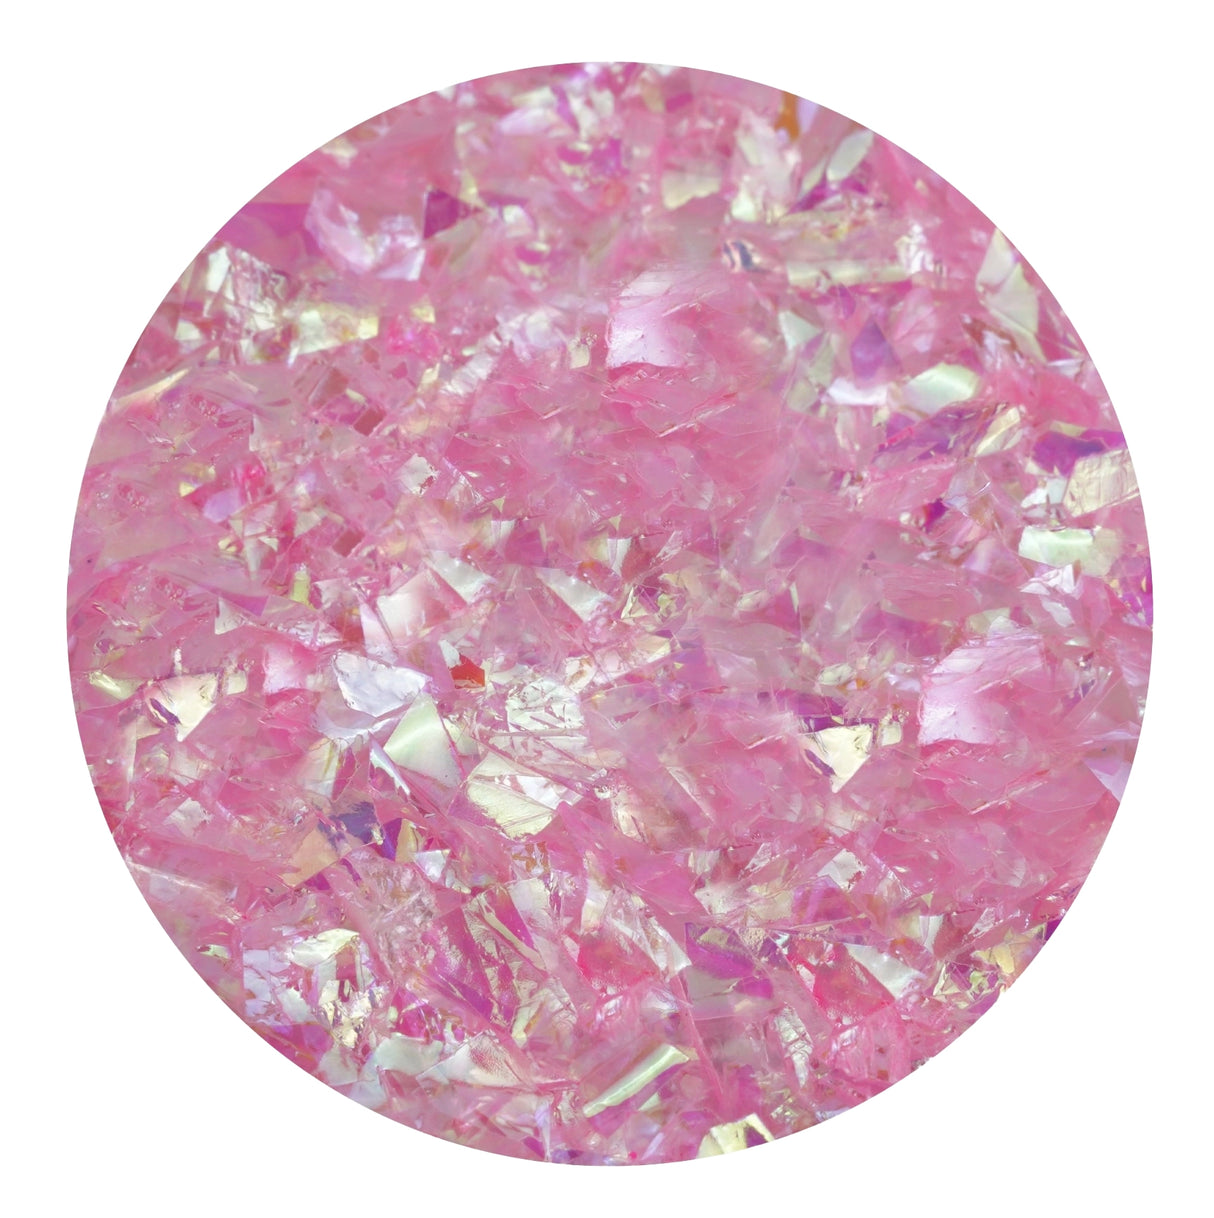 Iridescent Fractured Flakes - Light Pink